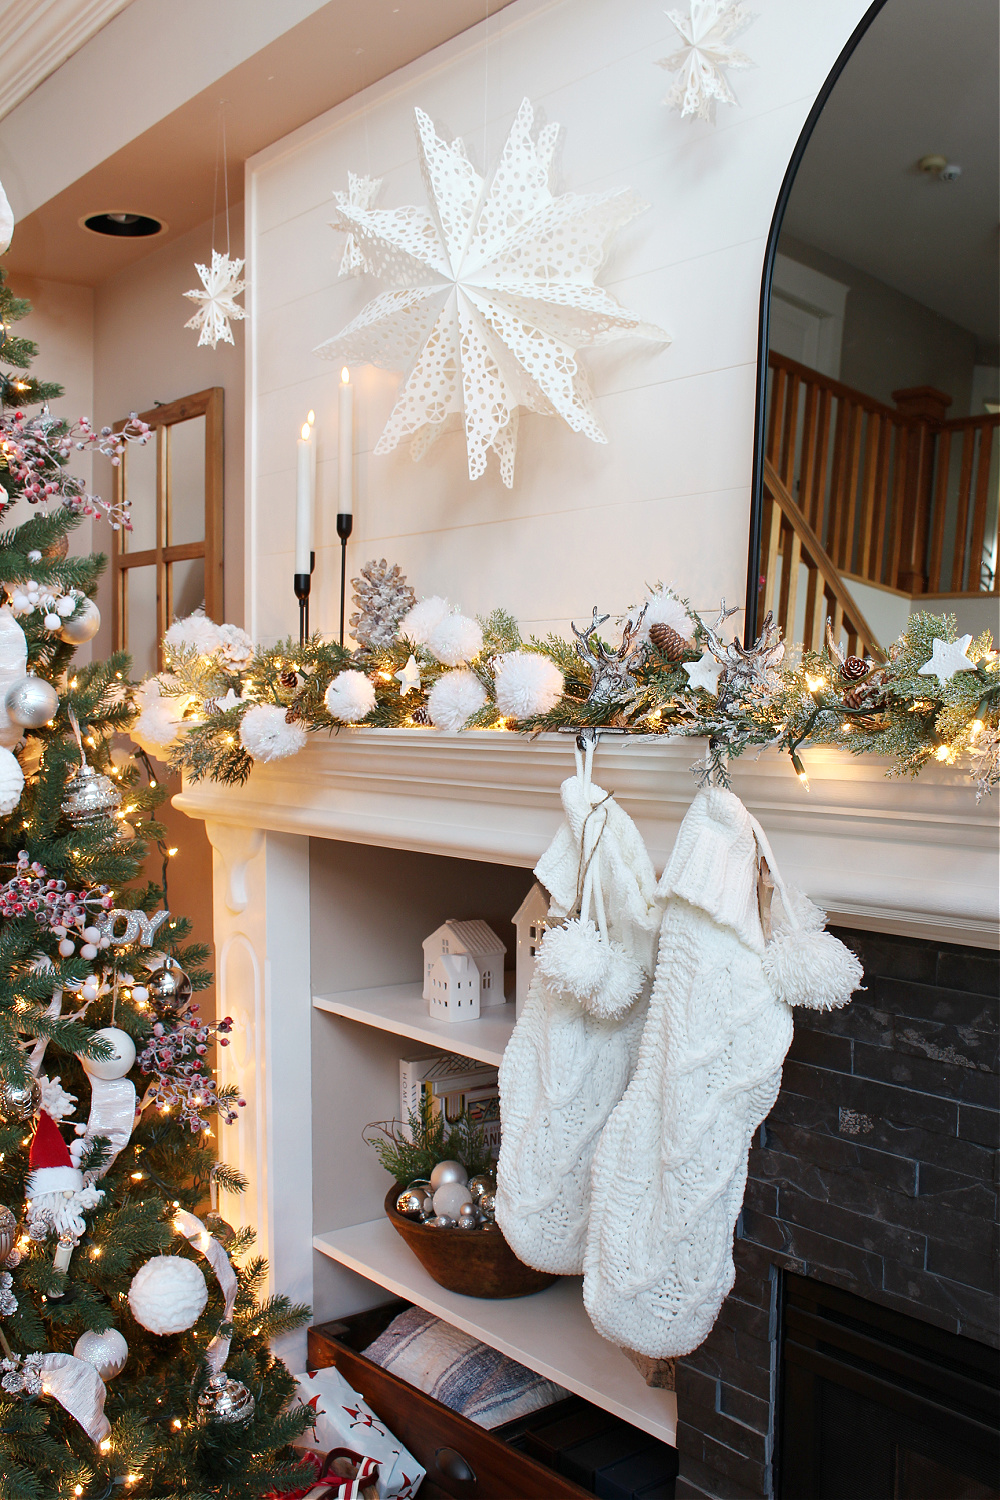 Christmas mantel with paper snowflakes, snowballs, and white stockings.